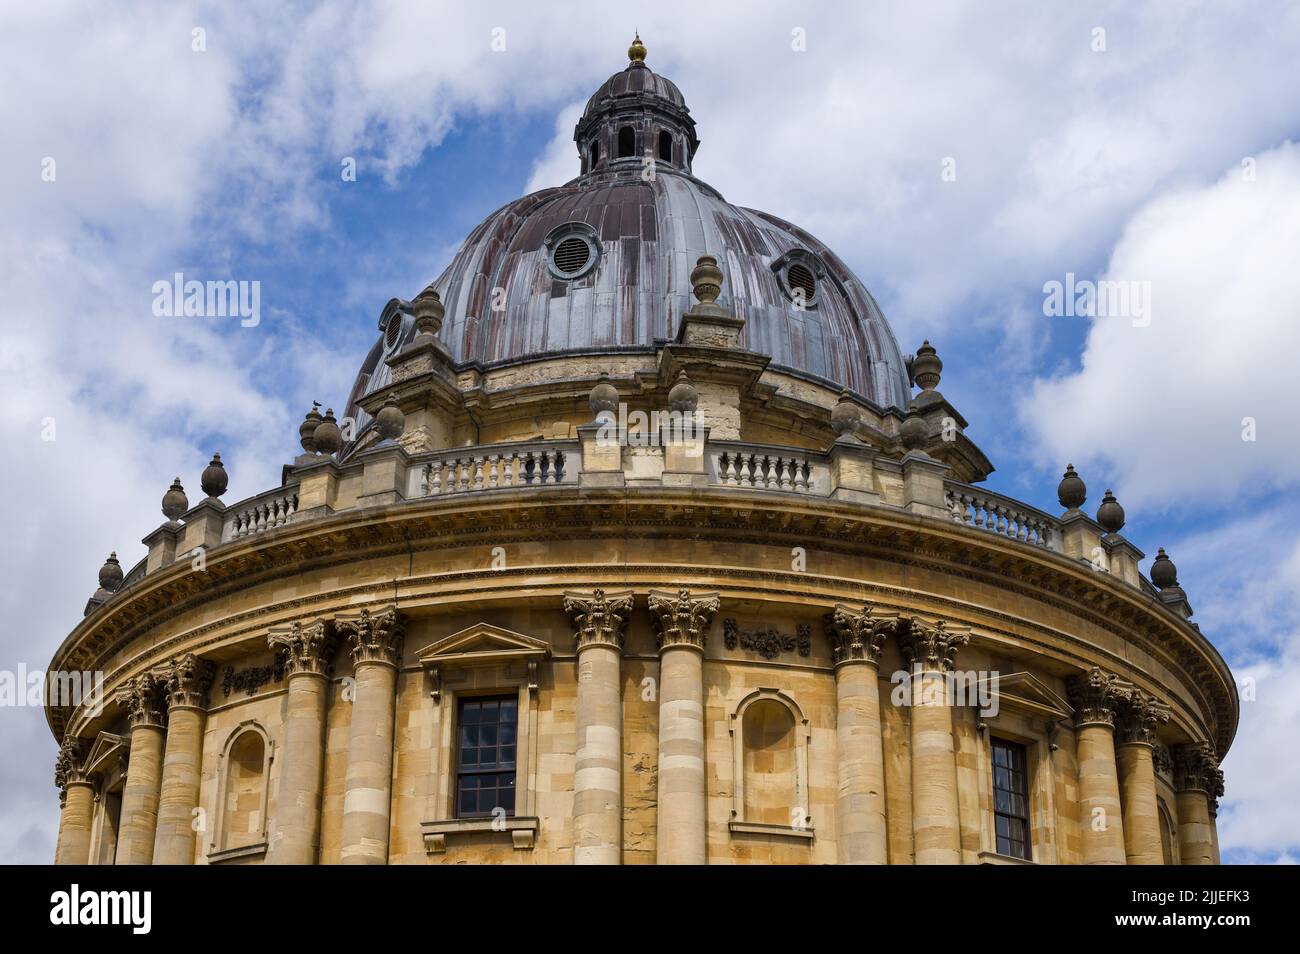 Exterior of the Radcliffe Camera, 18th-century, Palladian-style academic library and reading rooms, designed by James Gibbs, Oxford, UK Stock Photo